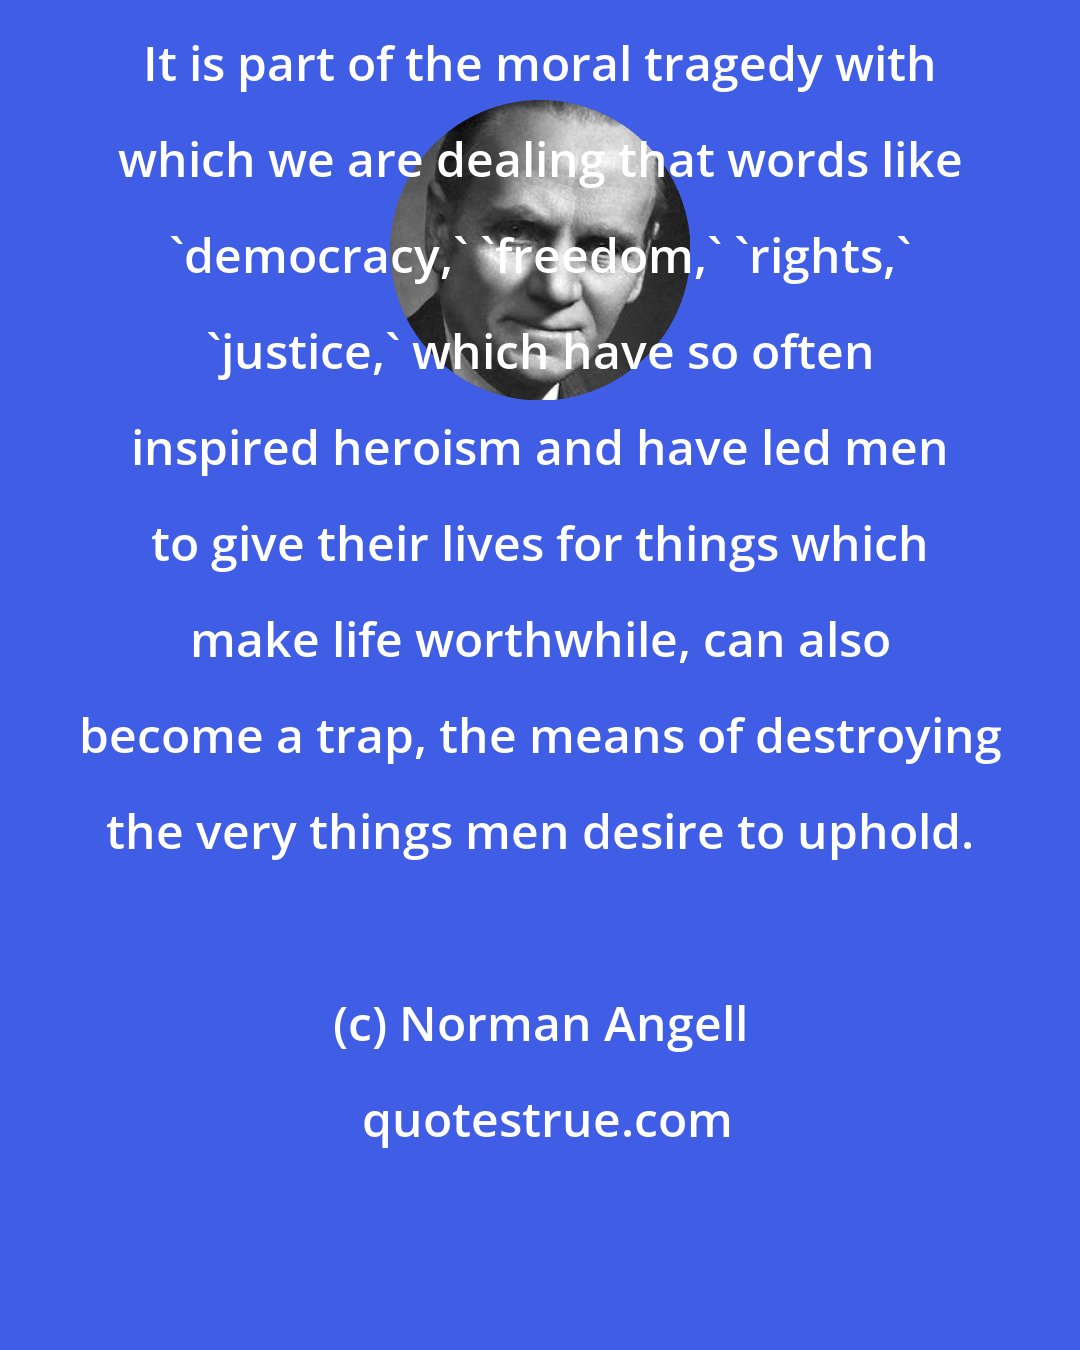 Norman Angell: It is part of the moral tragedy with which we are dealing that words like 'democracy,' 'freedom,' 'rights,' 'justice,' which have so often inspired heroism and have led men to give their lives for things which make life worthwhile, can also become a trap, the means of destroying the very things men desire to uphold.